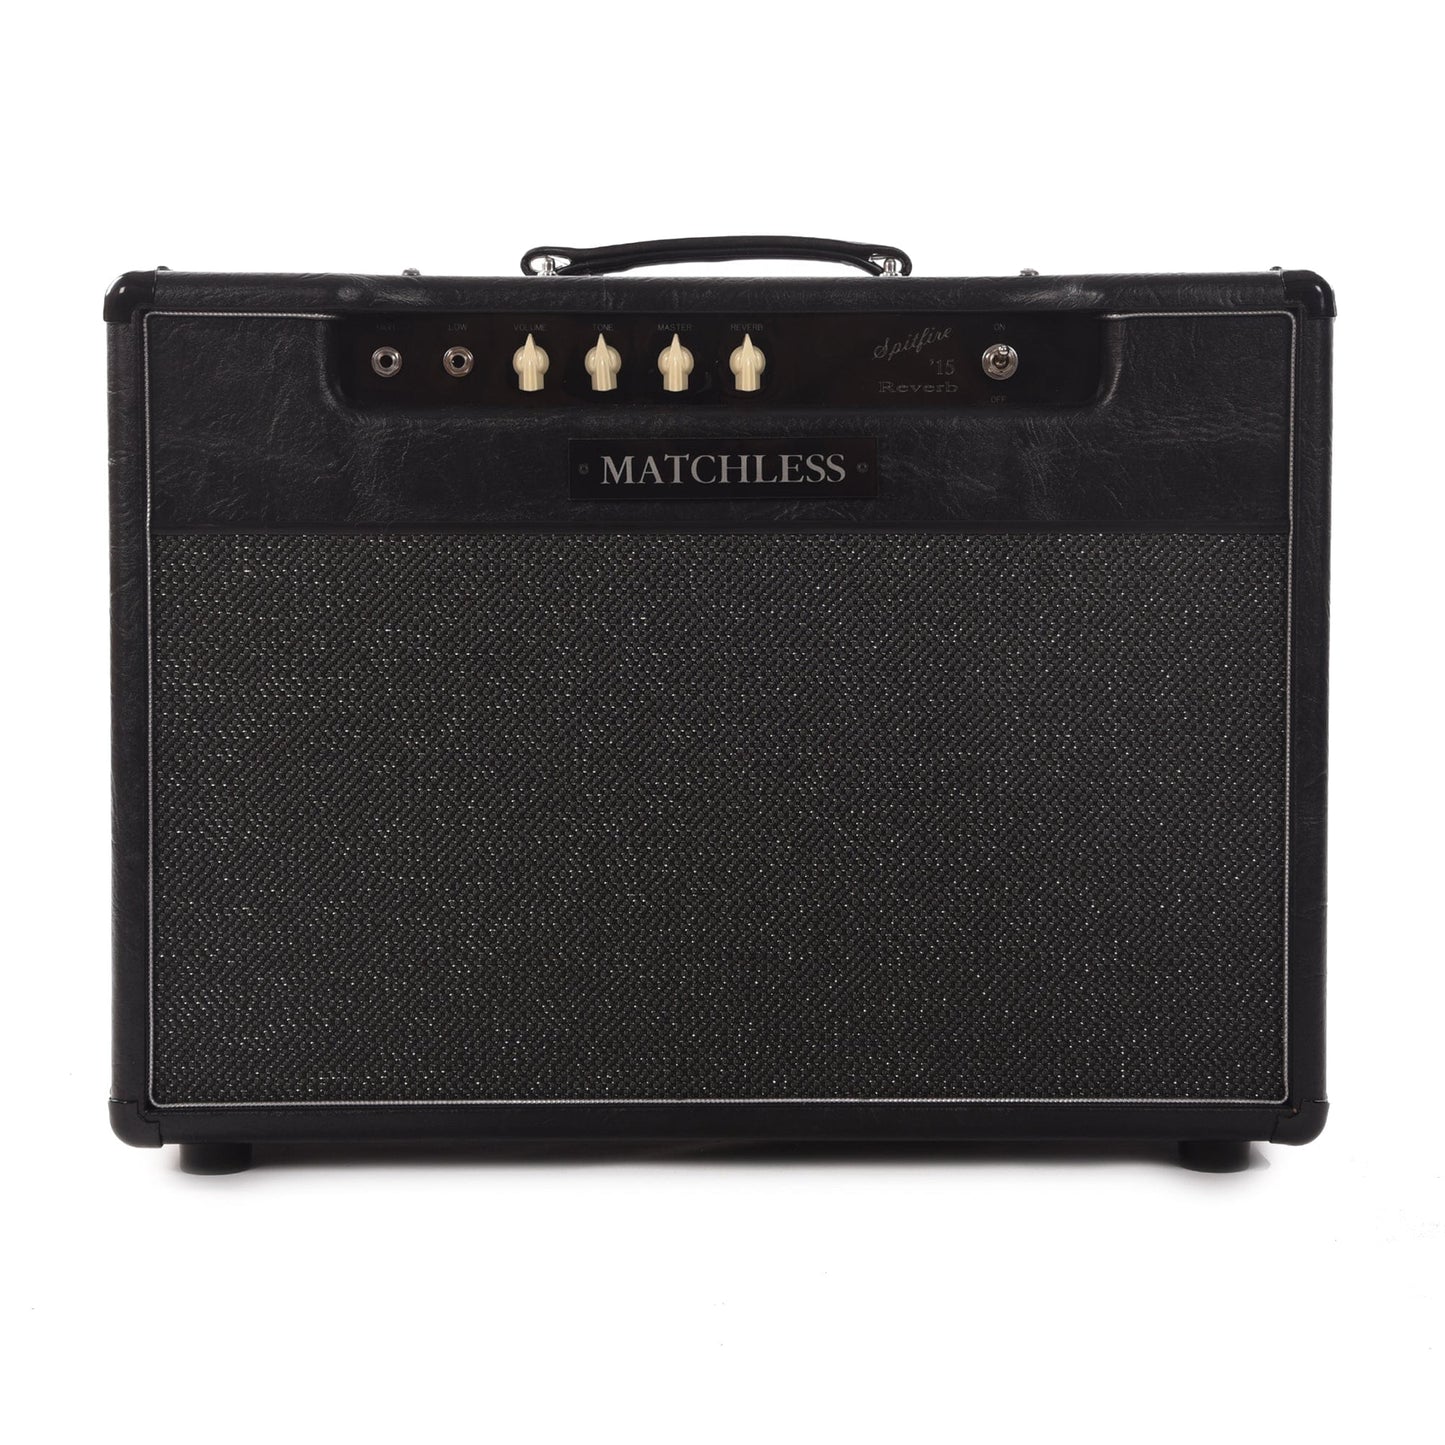 Matchless Spitfire Reverb 15W 1x12" Combo Black Amps / Guitar Combos